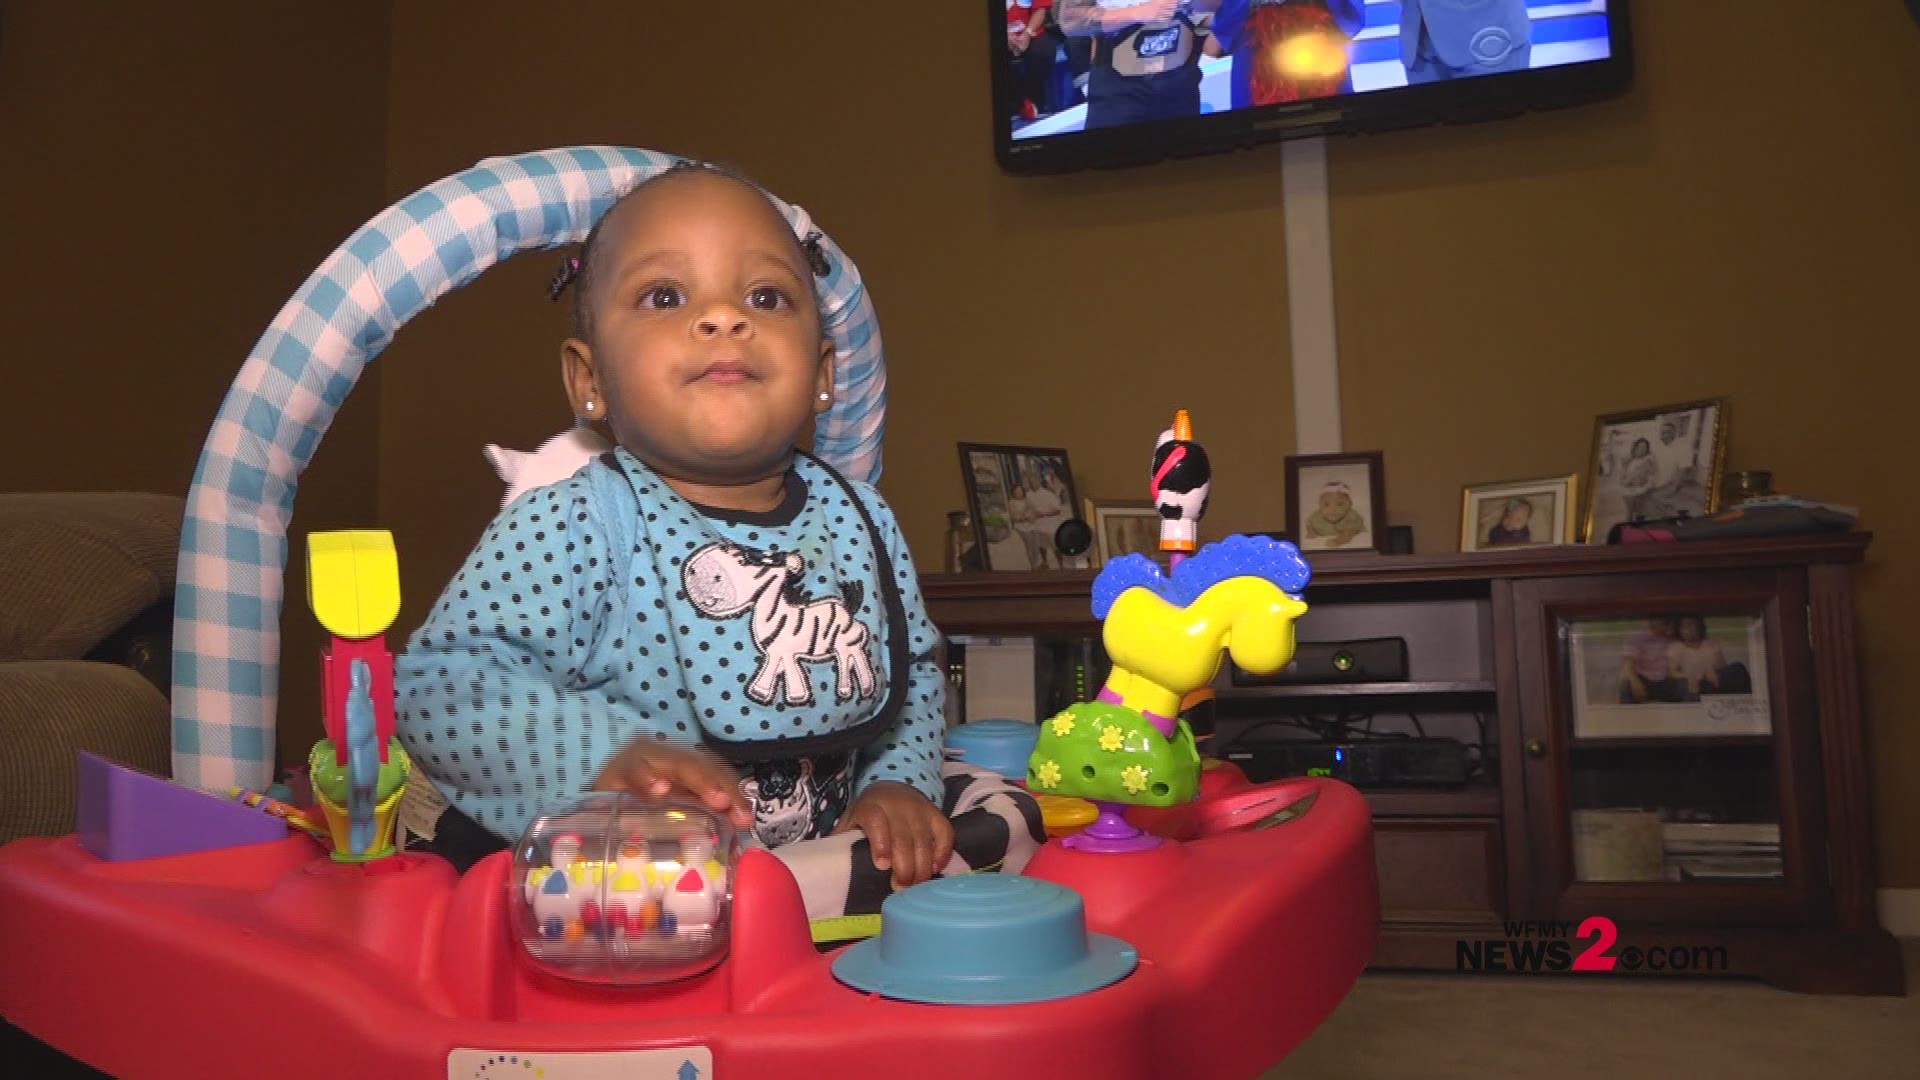 Greensboro Baby Picked As March Of Dimes Ambassador